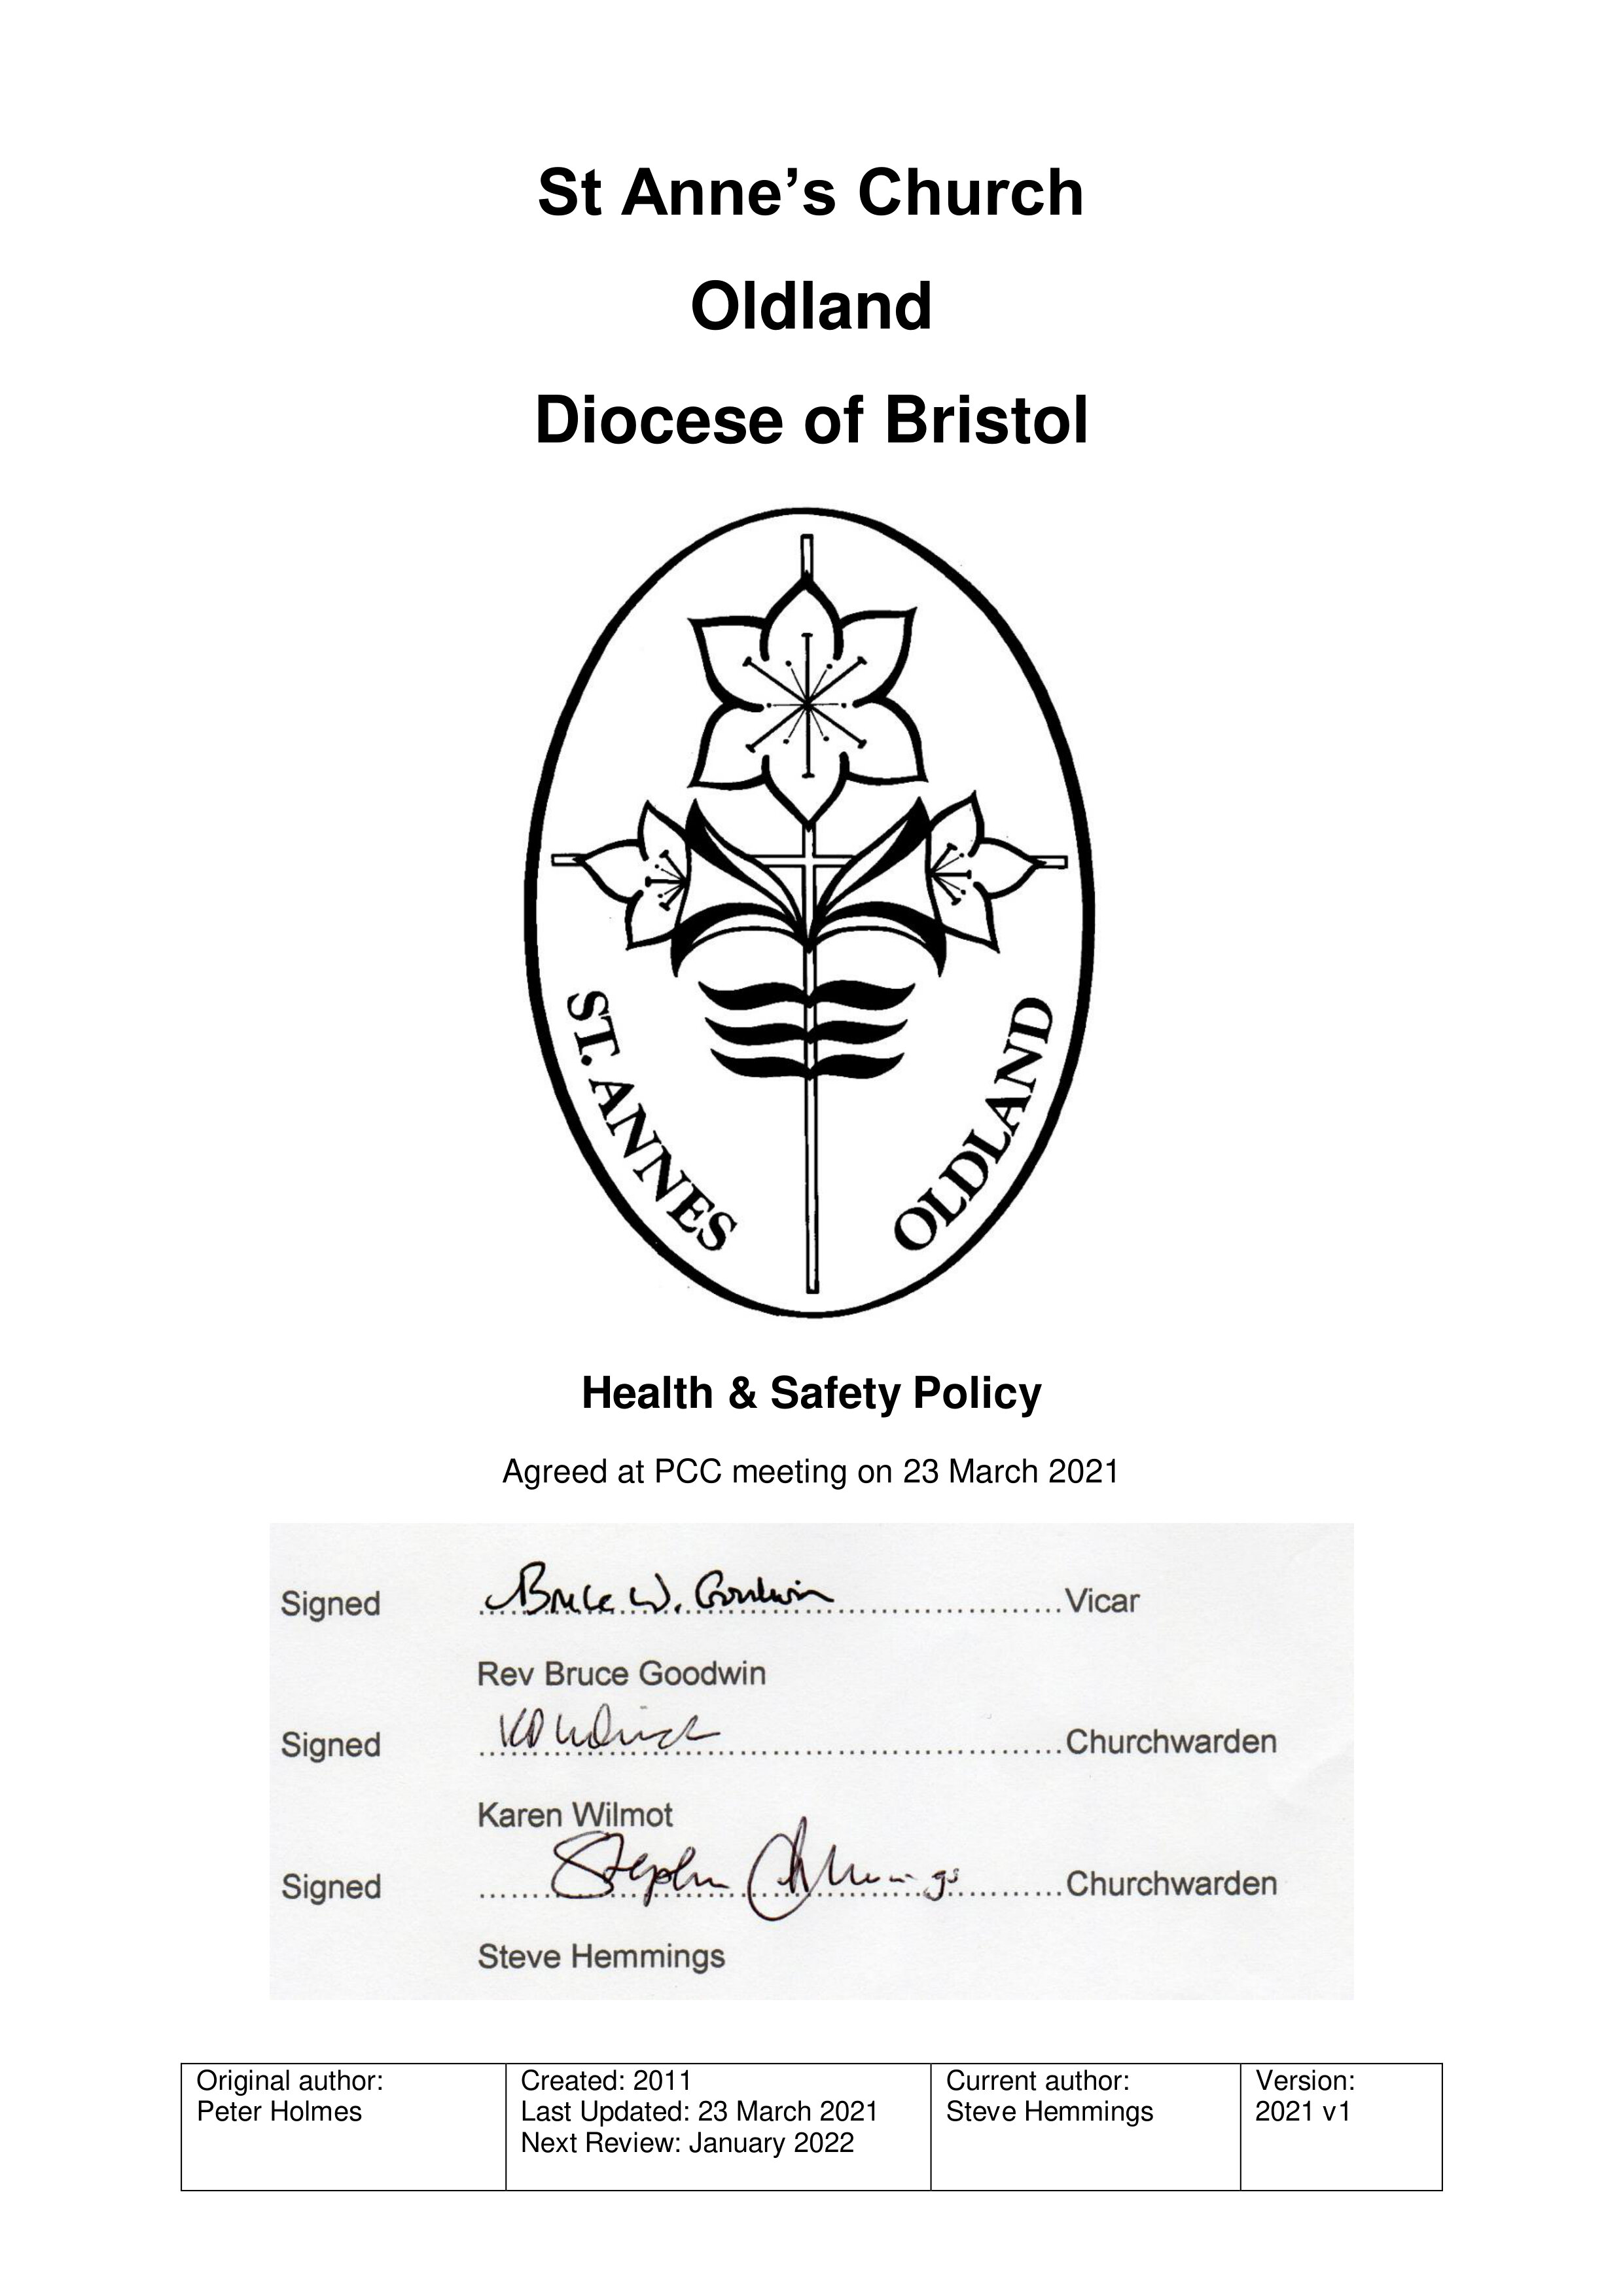 St Anne's Church Health & Safety Policy 2021 v1 signed.jpg